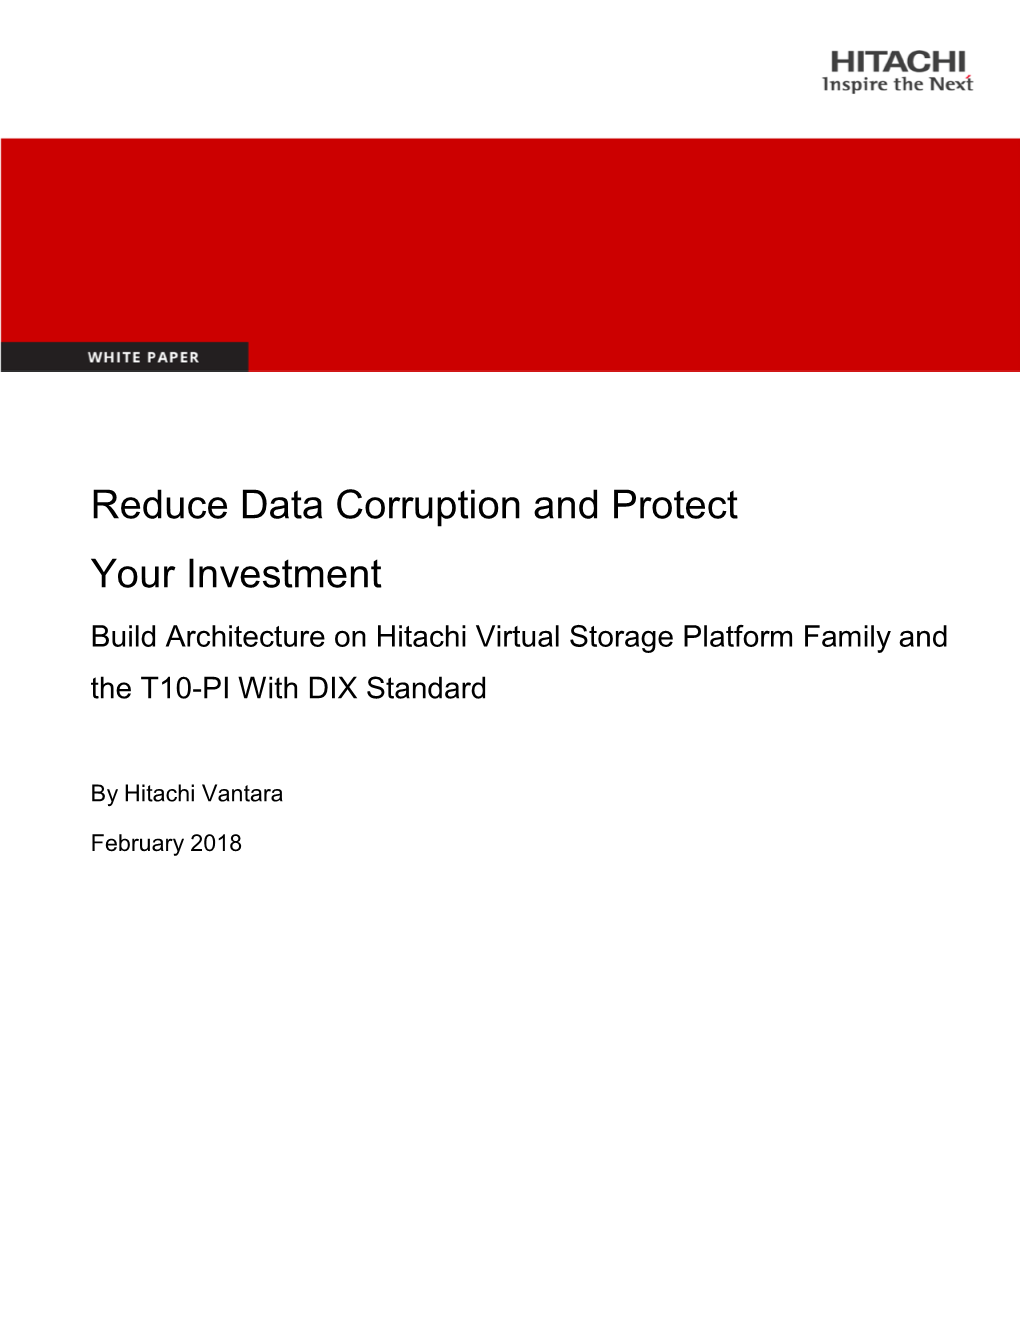 Reduce Data Corruption and Protect Your Investment Build Architecture on Hitachi Virtual Storage Platform Family and the T10-PI with DIX Standard